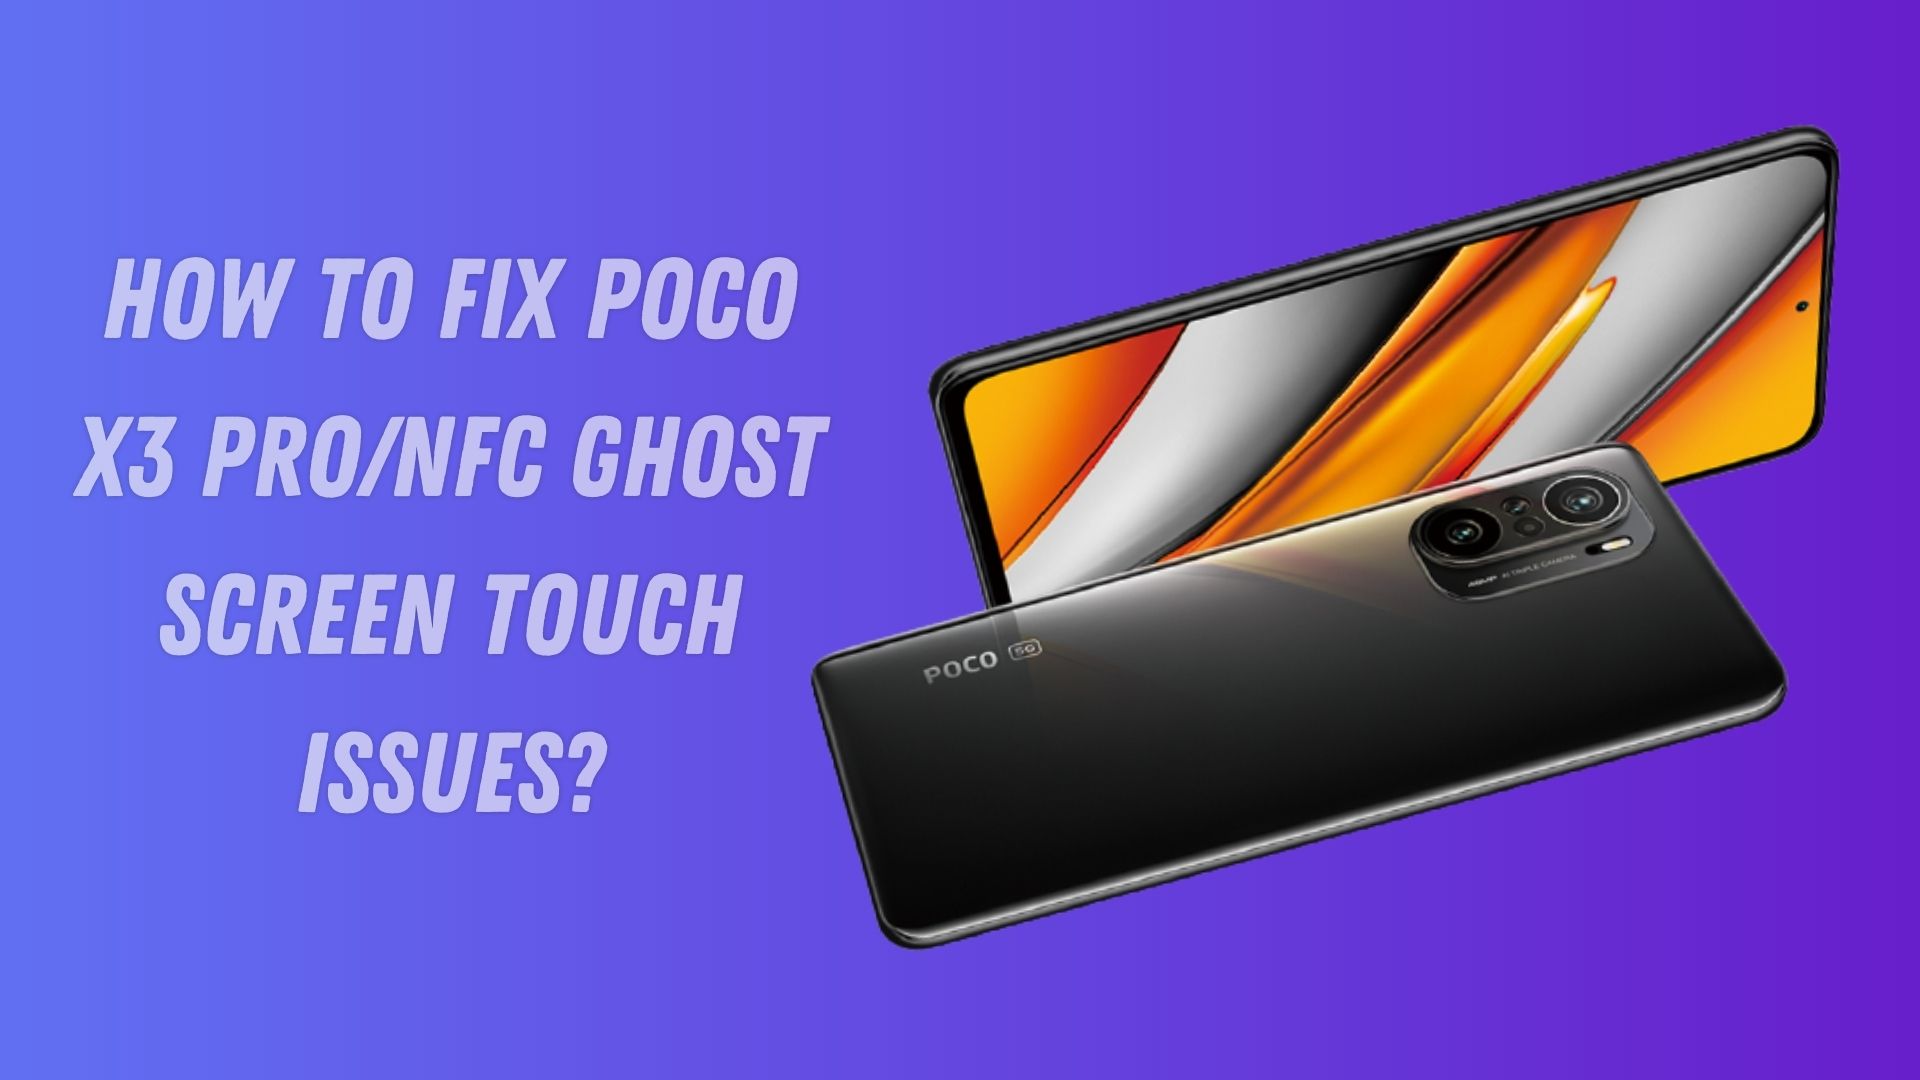 How to Fix Poco X3 Pro/NFC Ghost Screen Touch Issues?